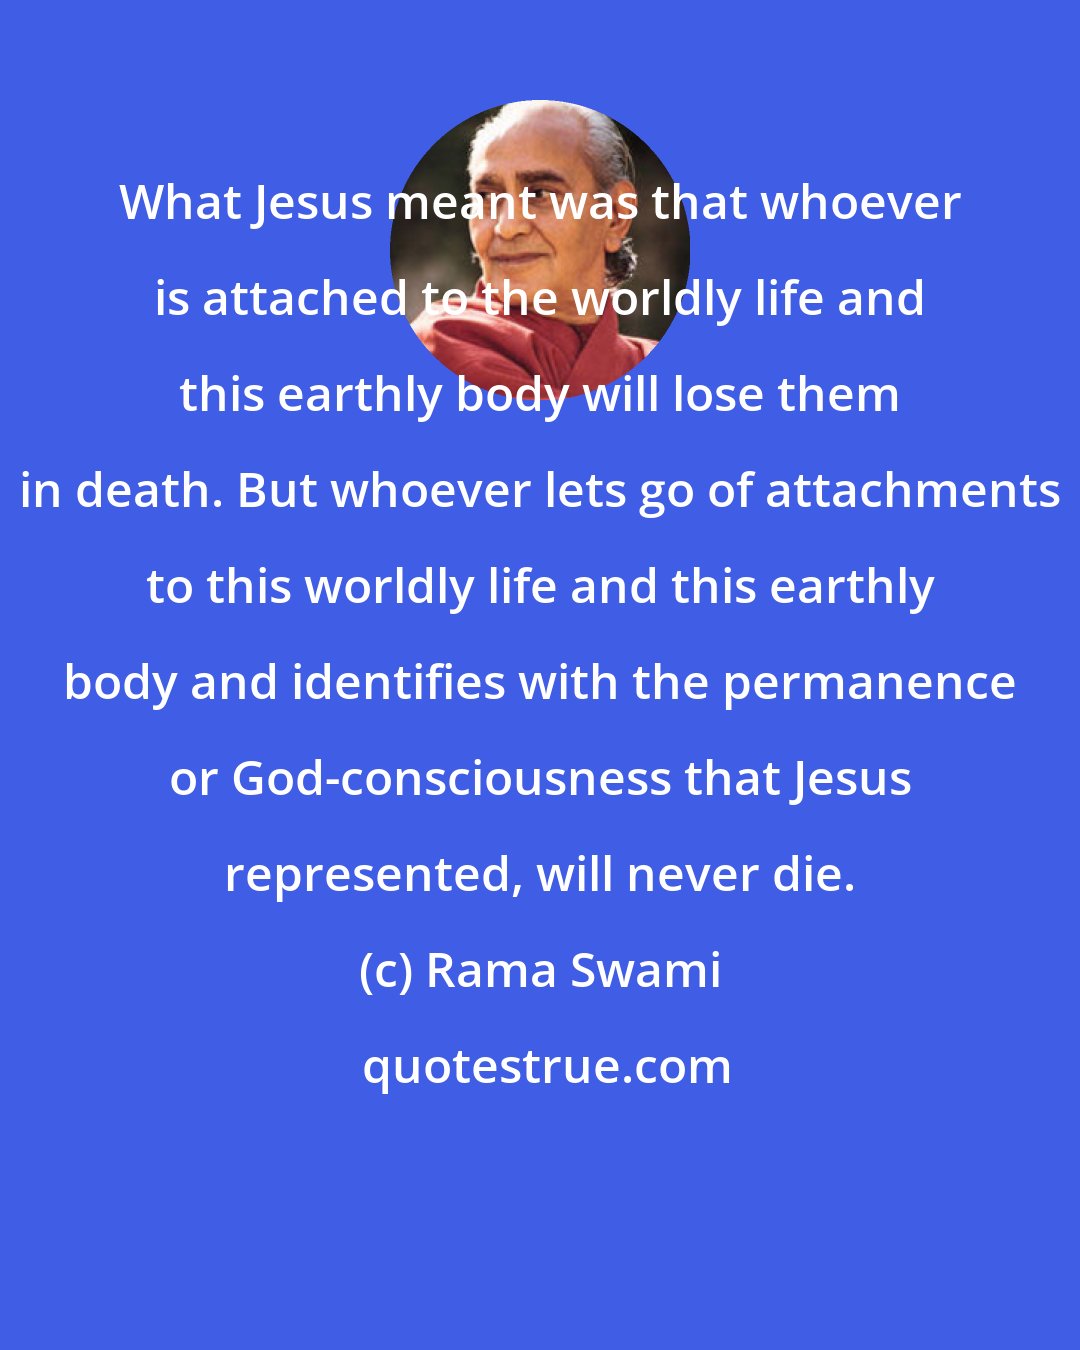 Rama Swami: What Jesus meant was that whoever is attached to the worldly life and this earthly body will lose them in death. But whoever lets go of attachments to this worldly life and this earthly body and identifies with the permanence or God-consciousness that Jesus represented, will never die.